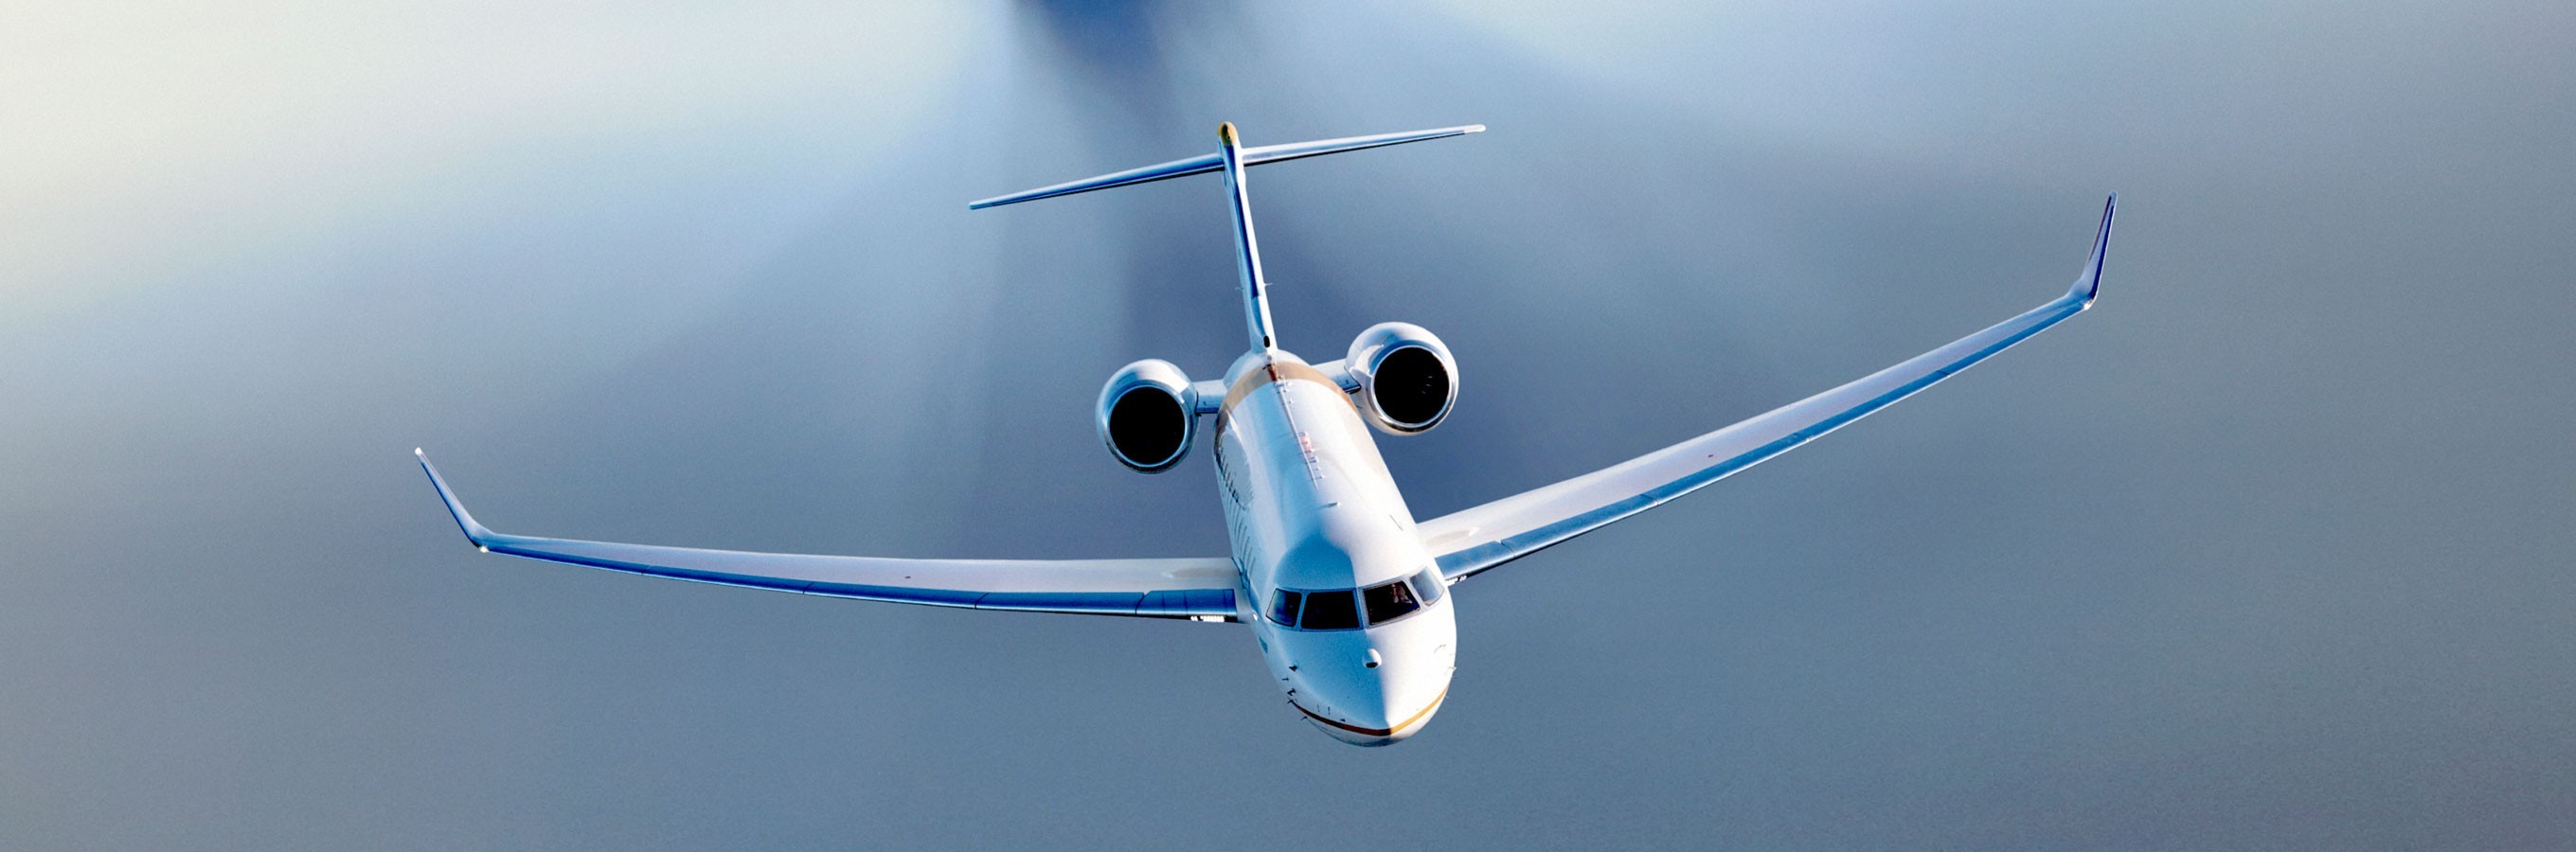 7 Steps to aircraft ownership